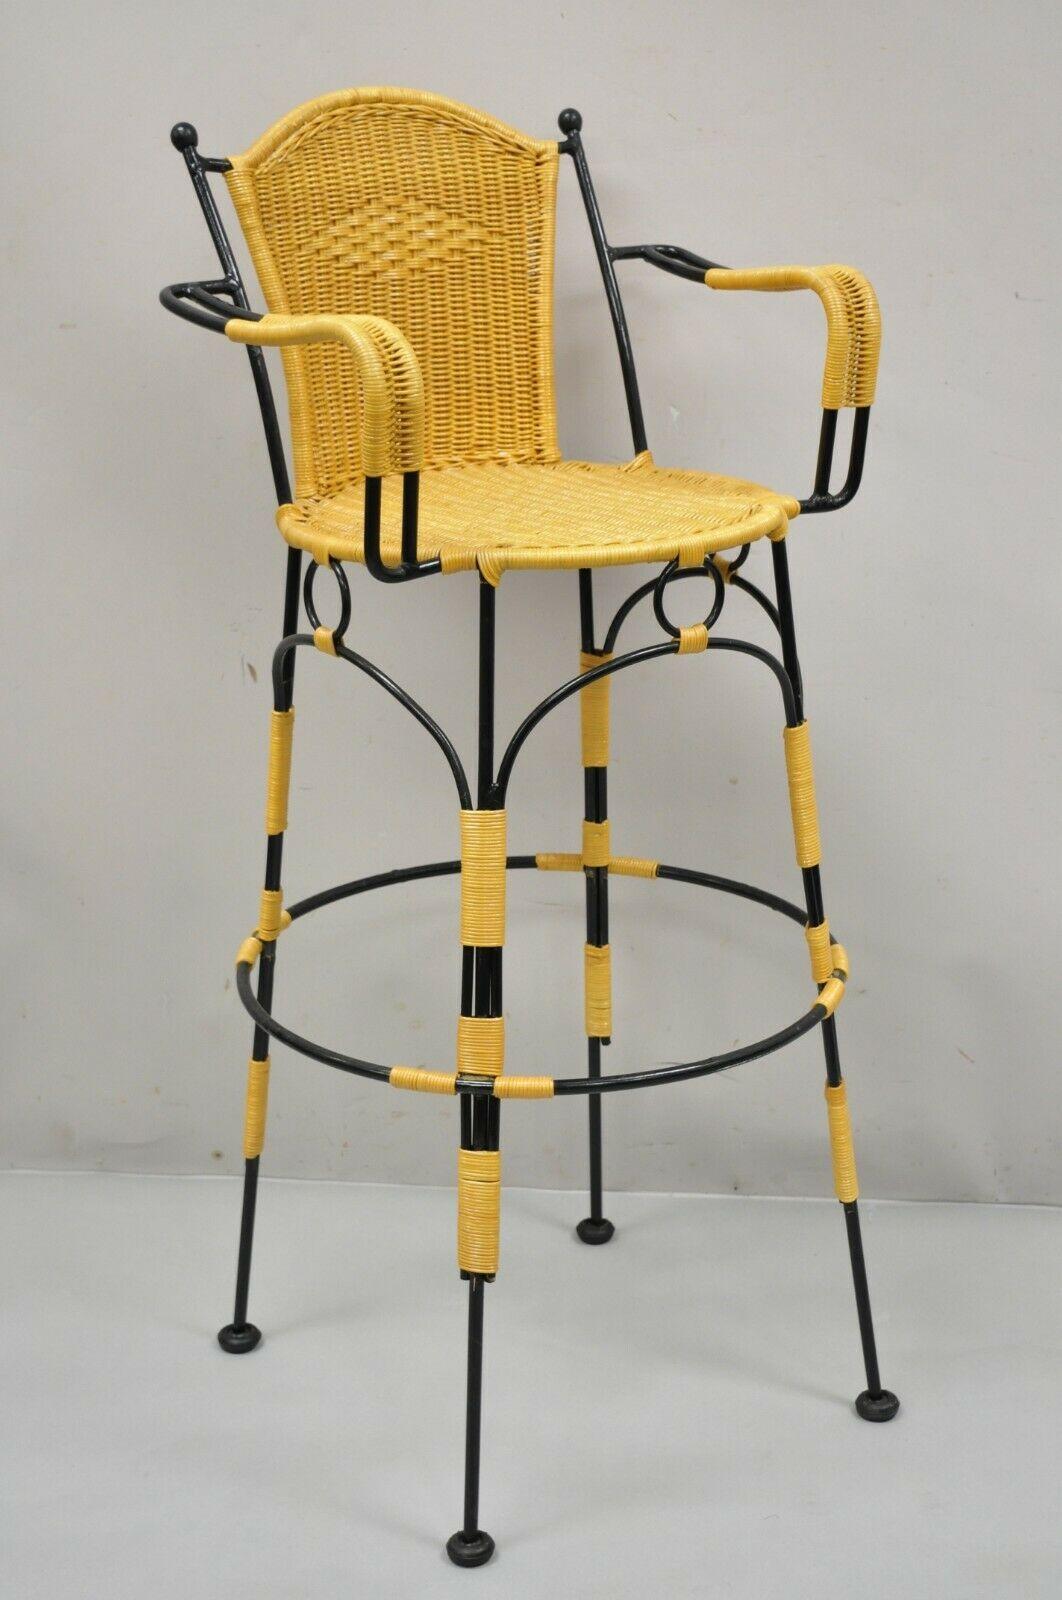 Wrought iron woven vinyl rattan spanish barstools with arms - set of 4. Listing includes (4) barstools, woven vinyl rattan wrapped frames, wrought iron construction, very nice set, quality craftsmanship, great style and form. Age: late 20th - early